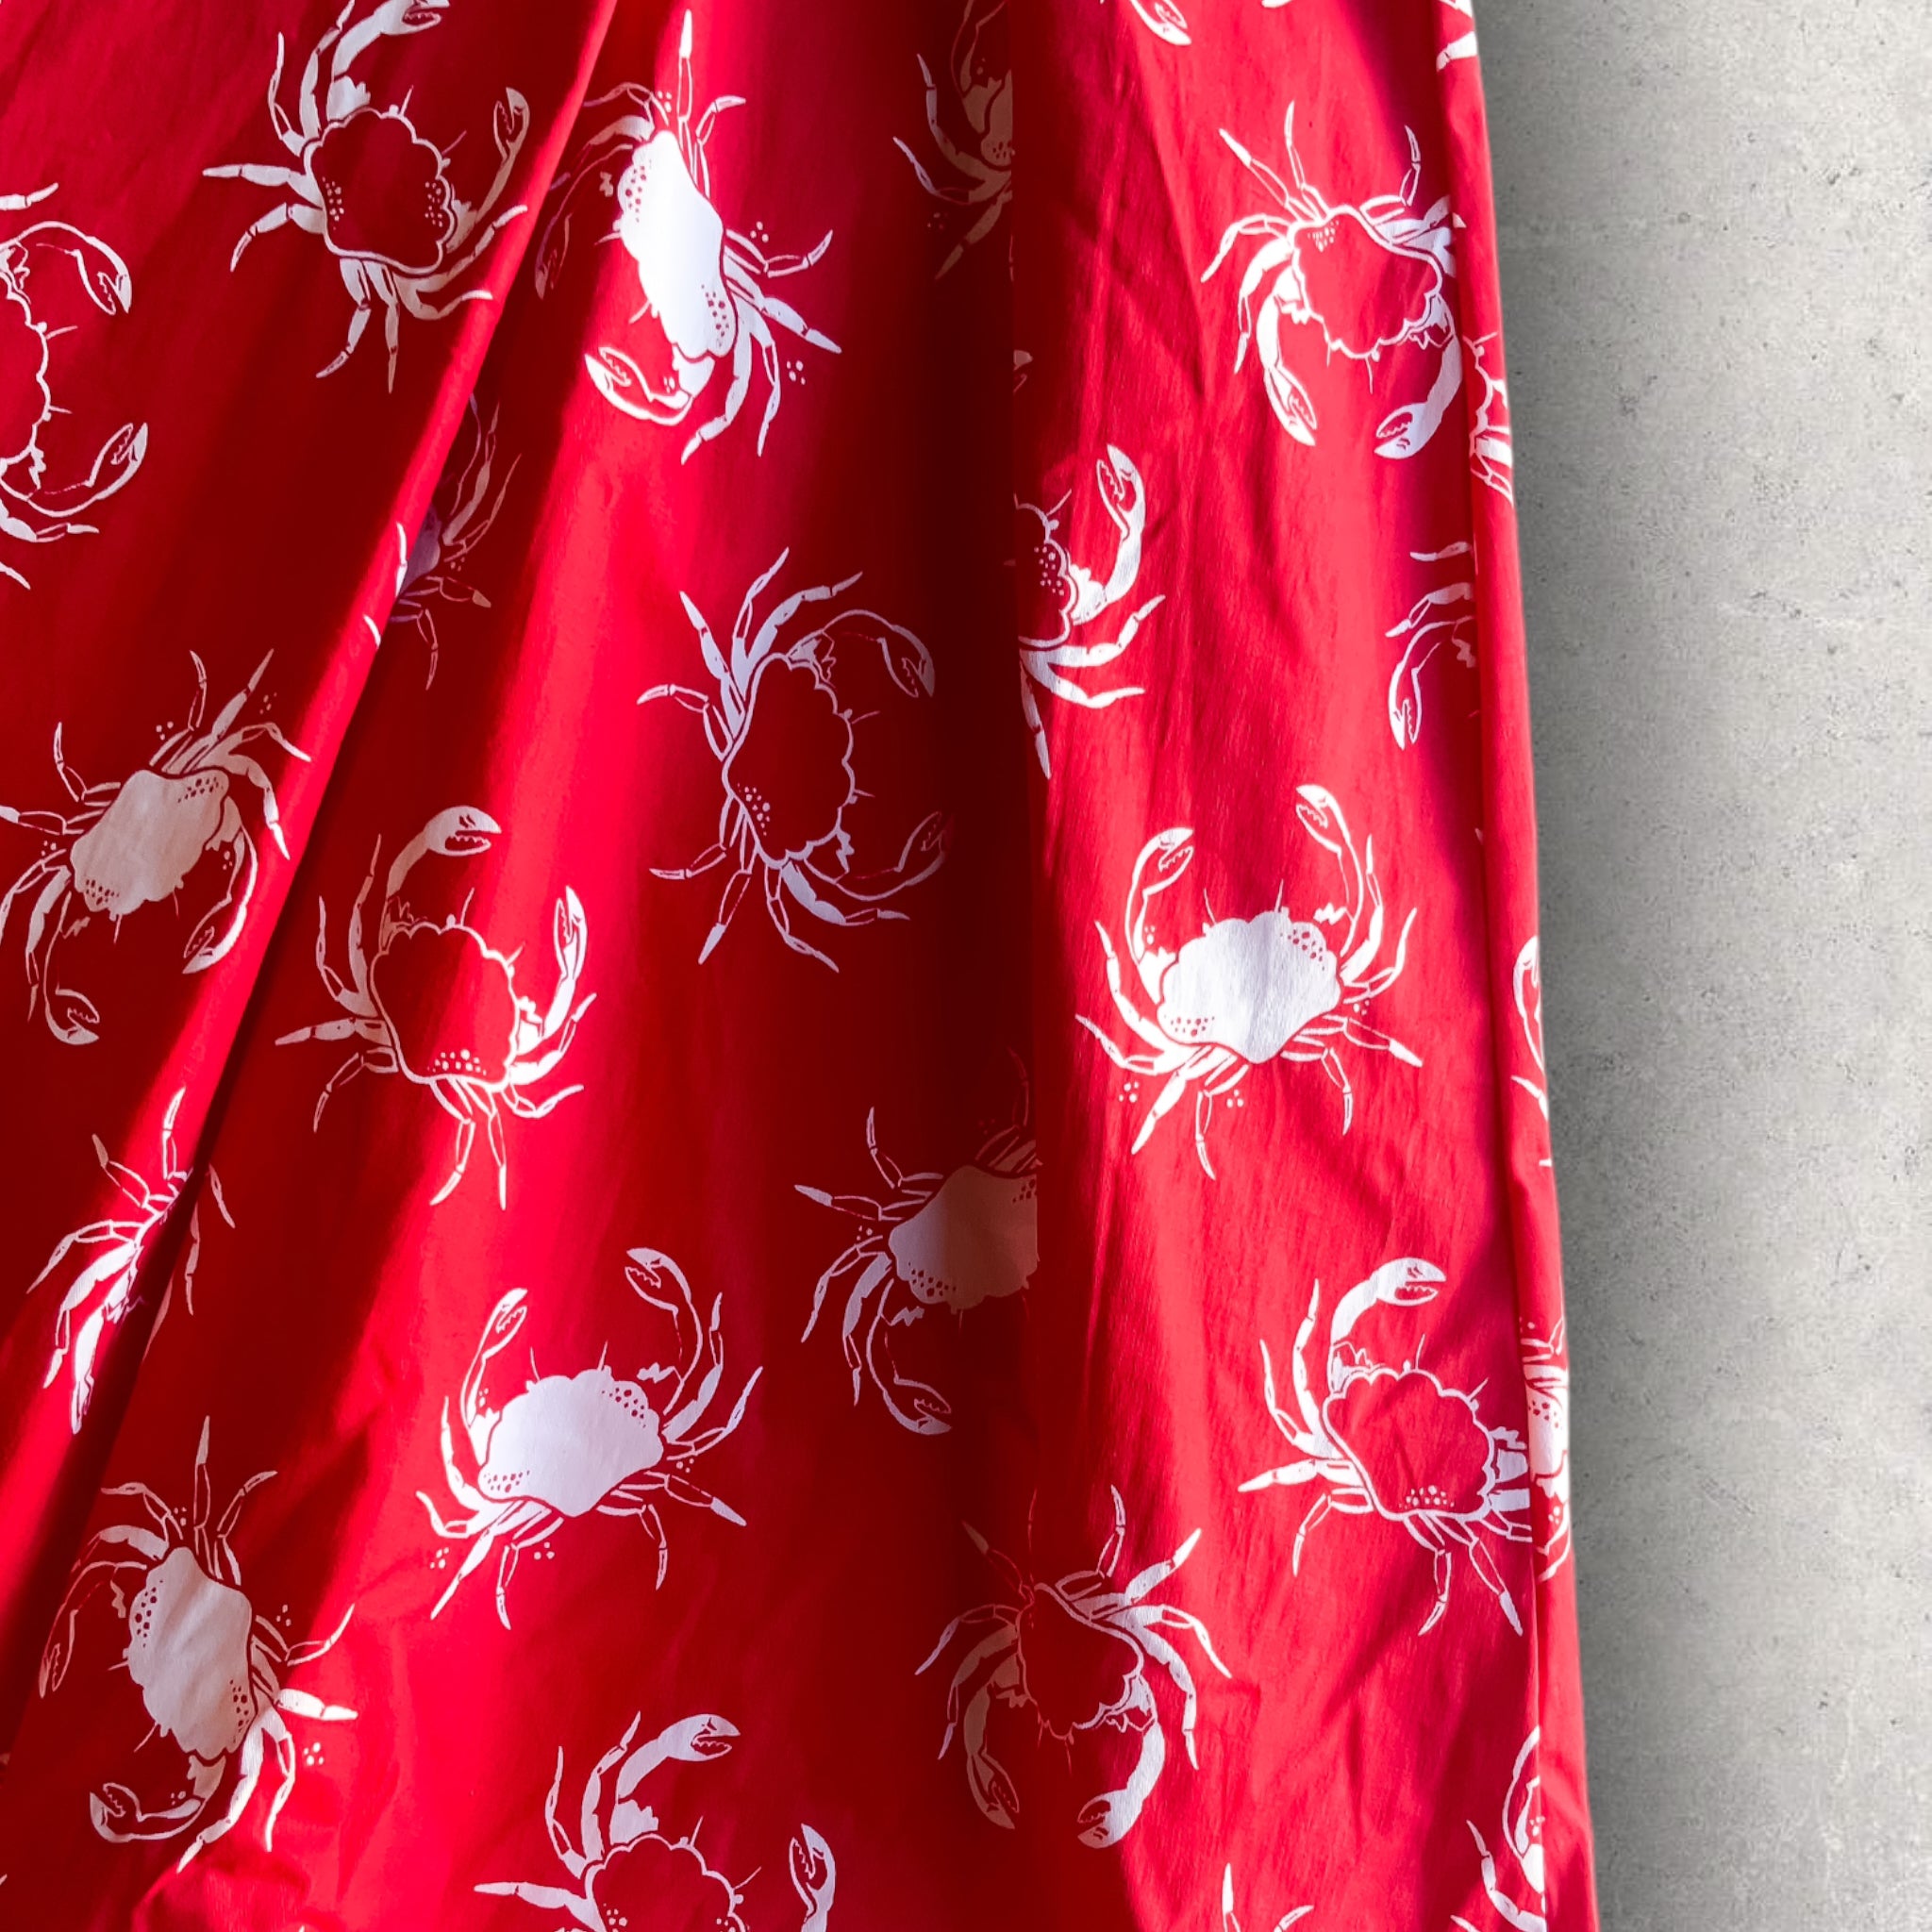 LINDY BOP 'Marie' Red Crab Print Swing Skirt - Size UK24